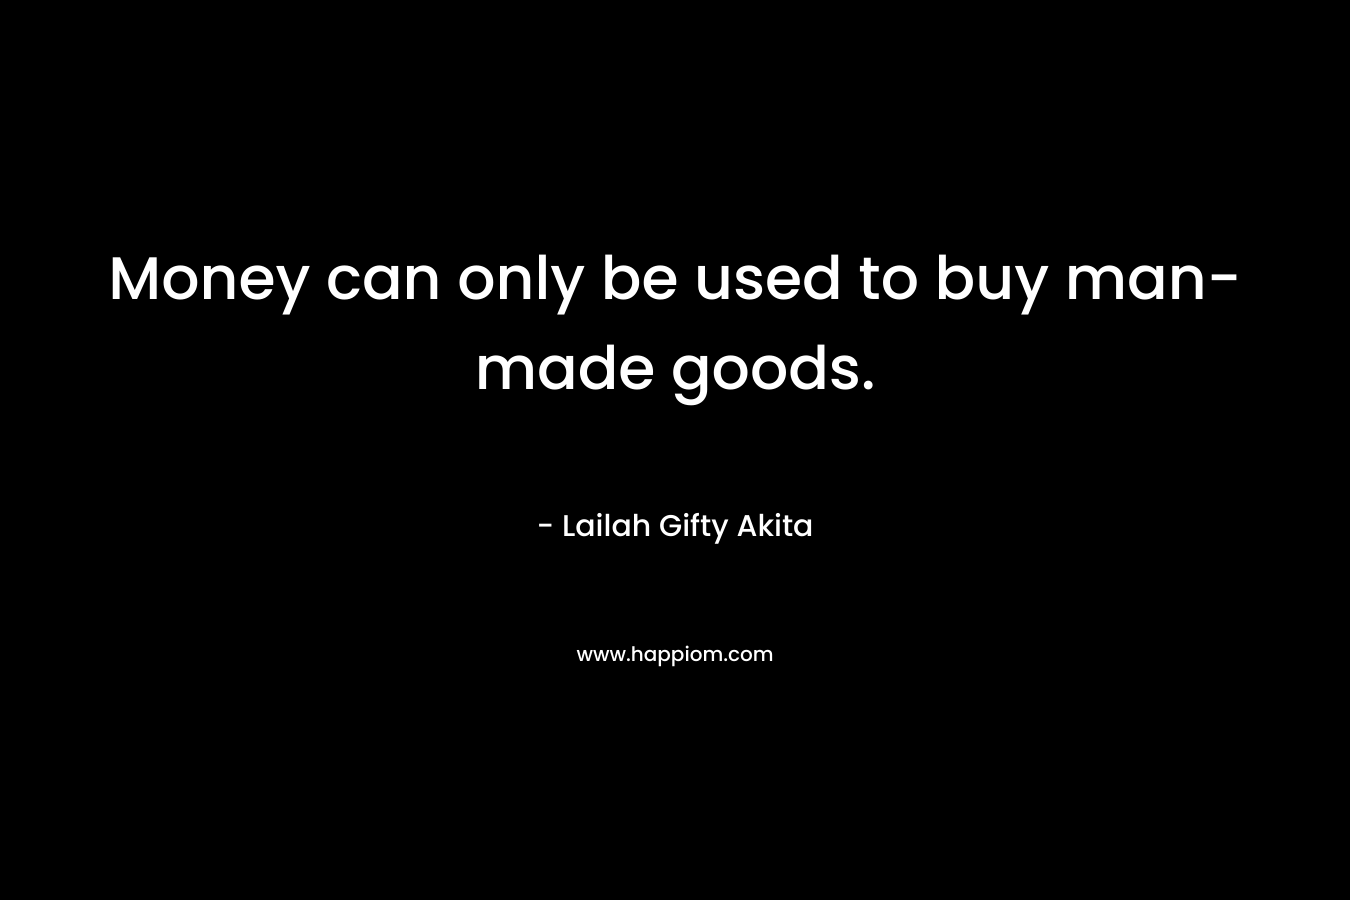 Money can only be used to buy man-made goods. – Lailah Gifty Akita